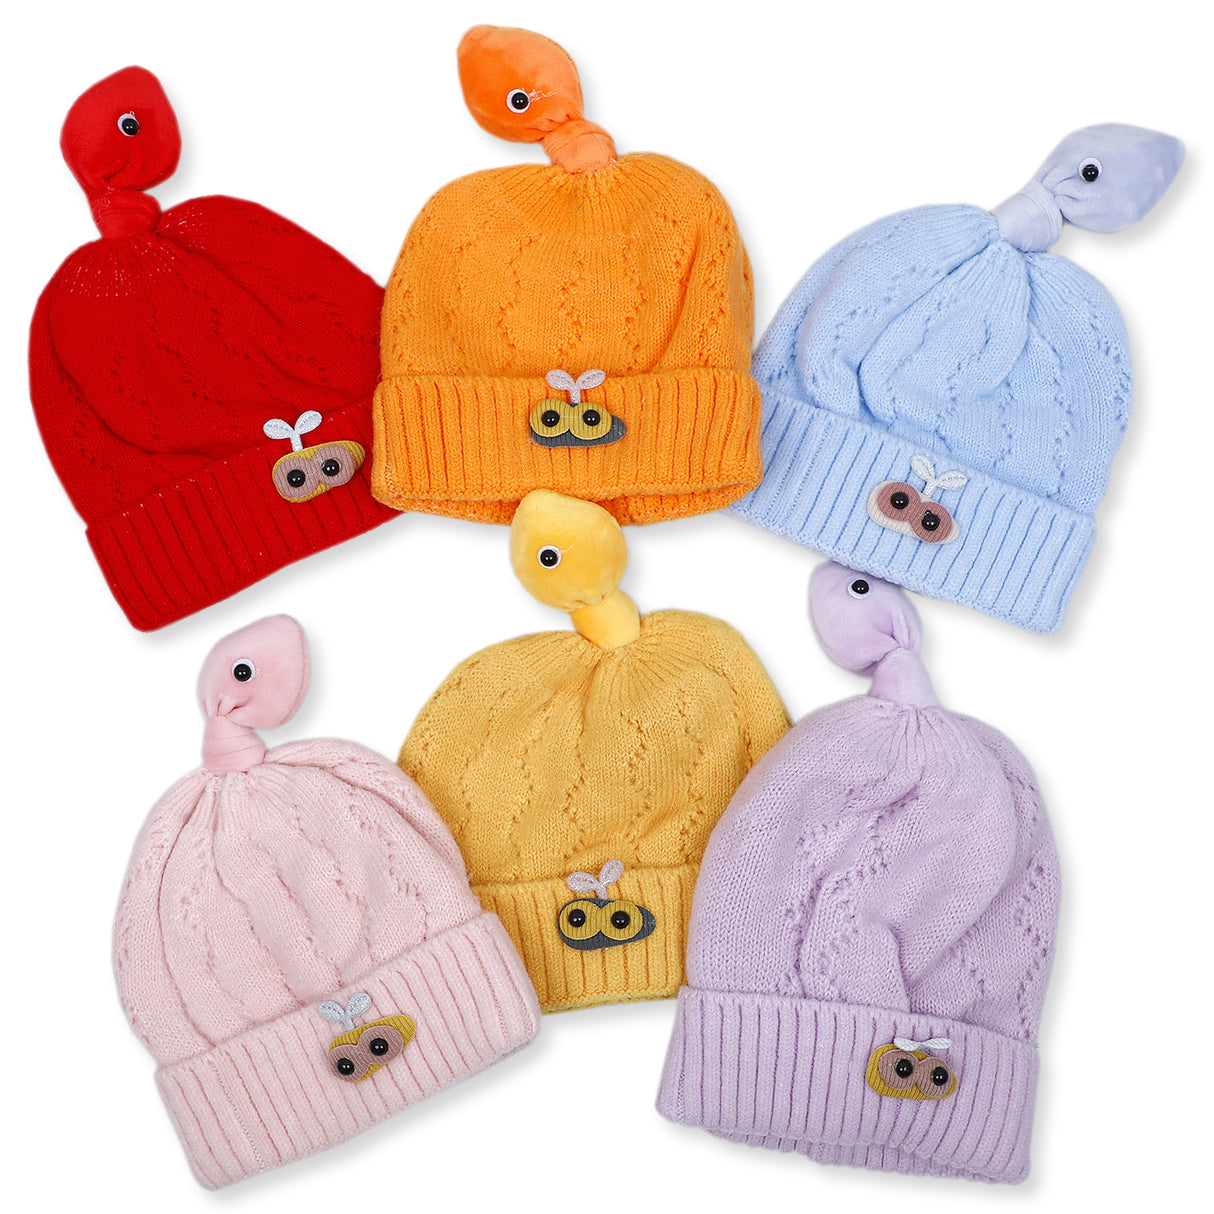 Insect Soft And Stretchable Woollen Cap